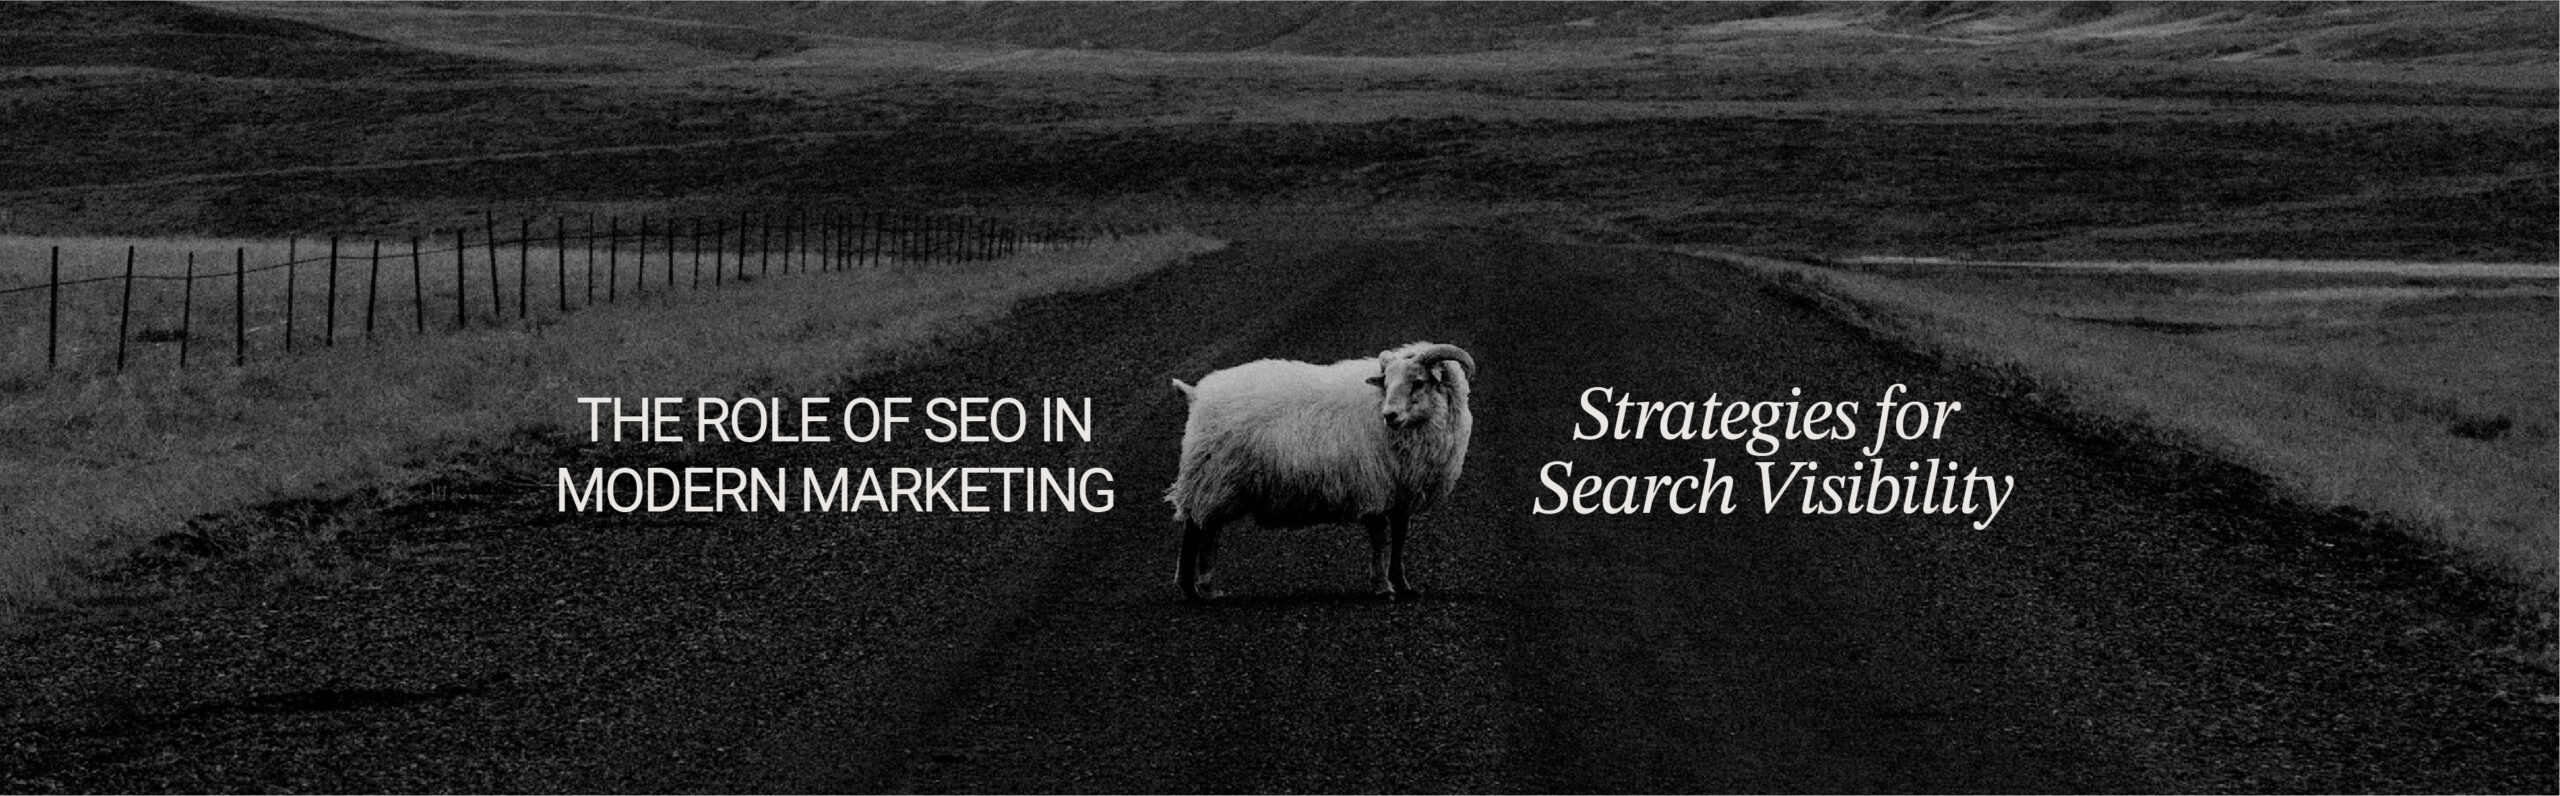 The Role of SEO in Modern Marketing: Strategies for Search Visibility